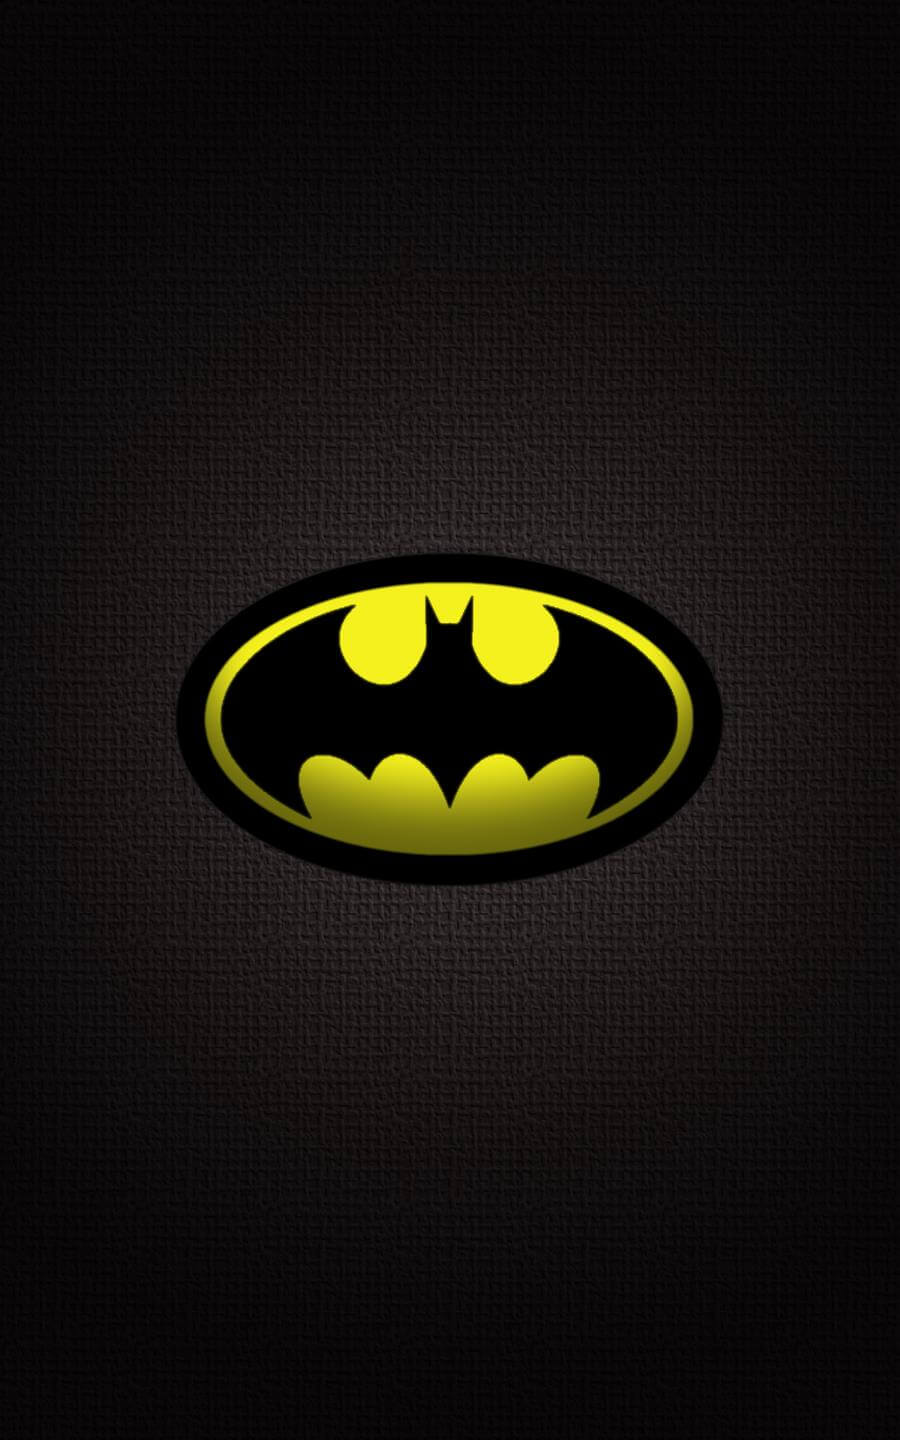 Free Download Batman Wallpaper Hd For Android Sf Wallpaper 900x1440 For Your Desktop Mobile Tablet Explore Android Batman Hd Wallpaper Android Batman Hd Wallpaper Batman Android Wallpapers Batman Wallpaper Android